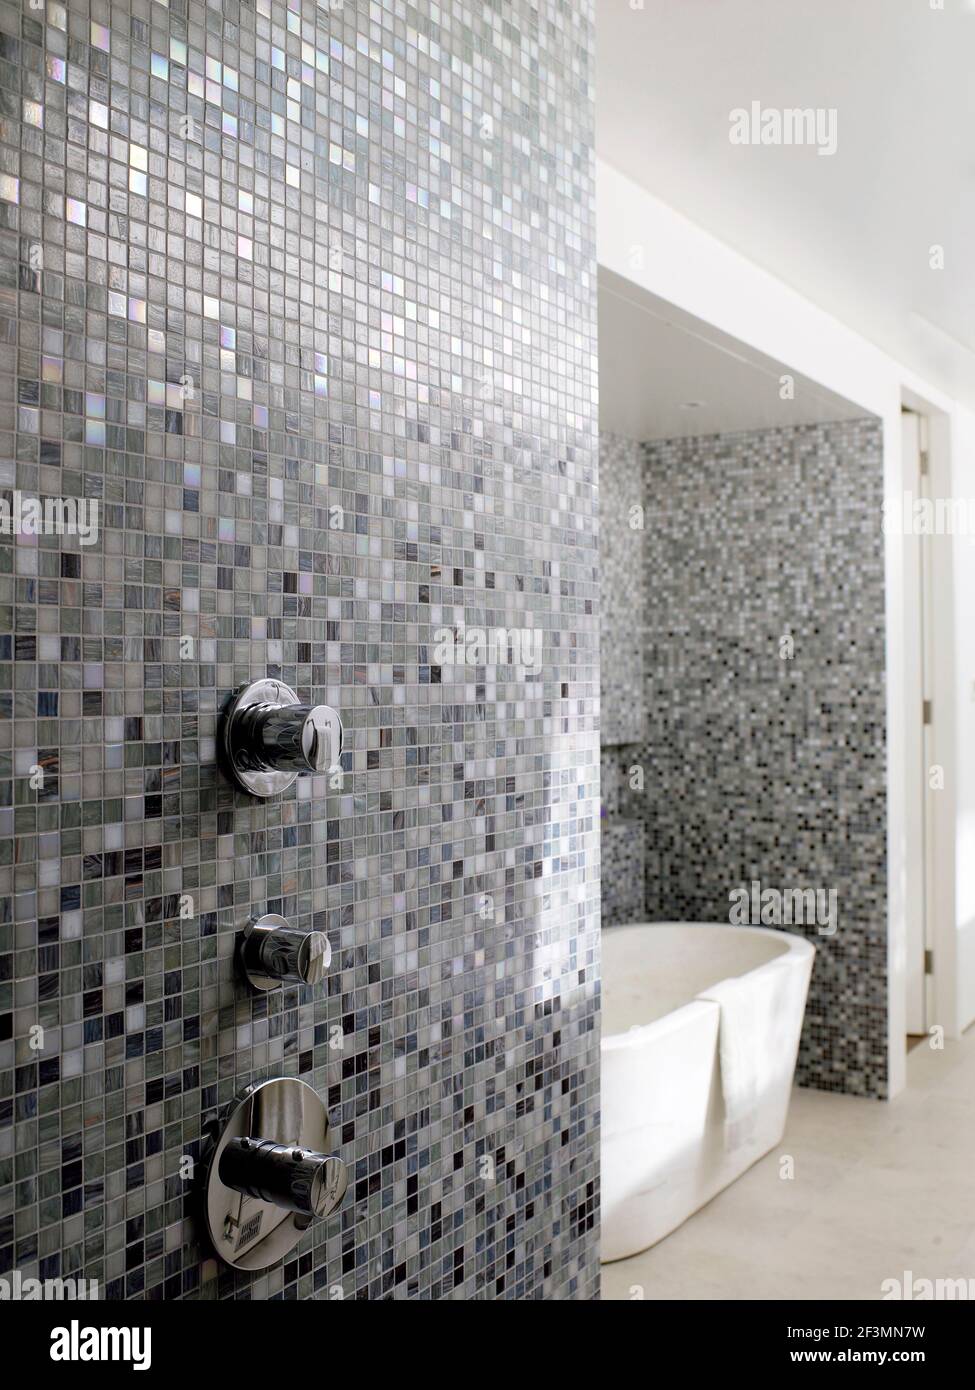 Tiled shower recess in bathroom with freestanding bath in UK home Stock Photo